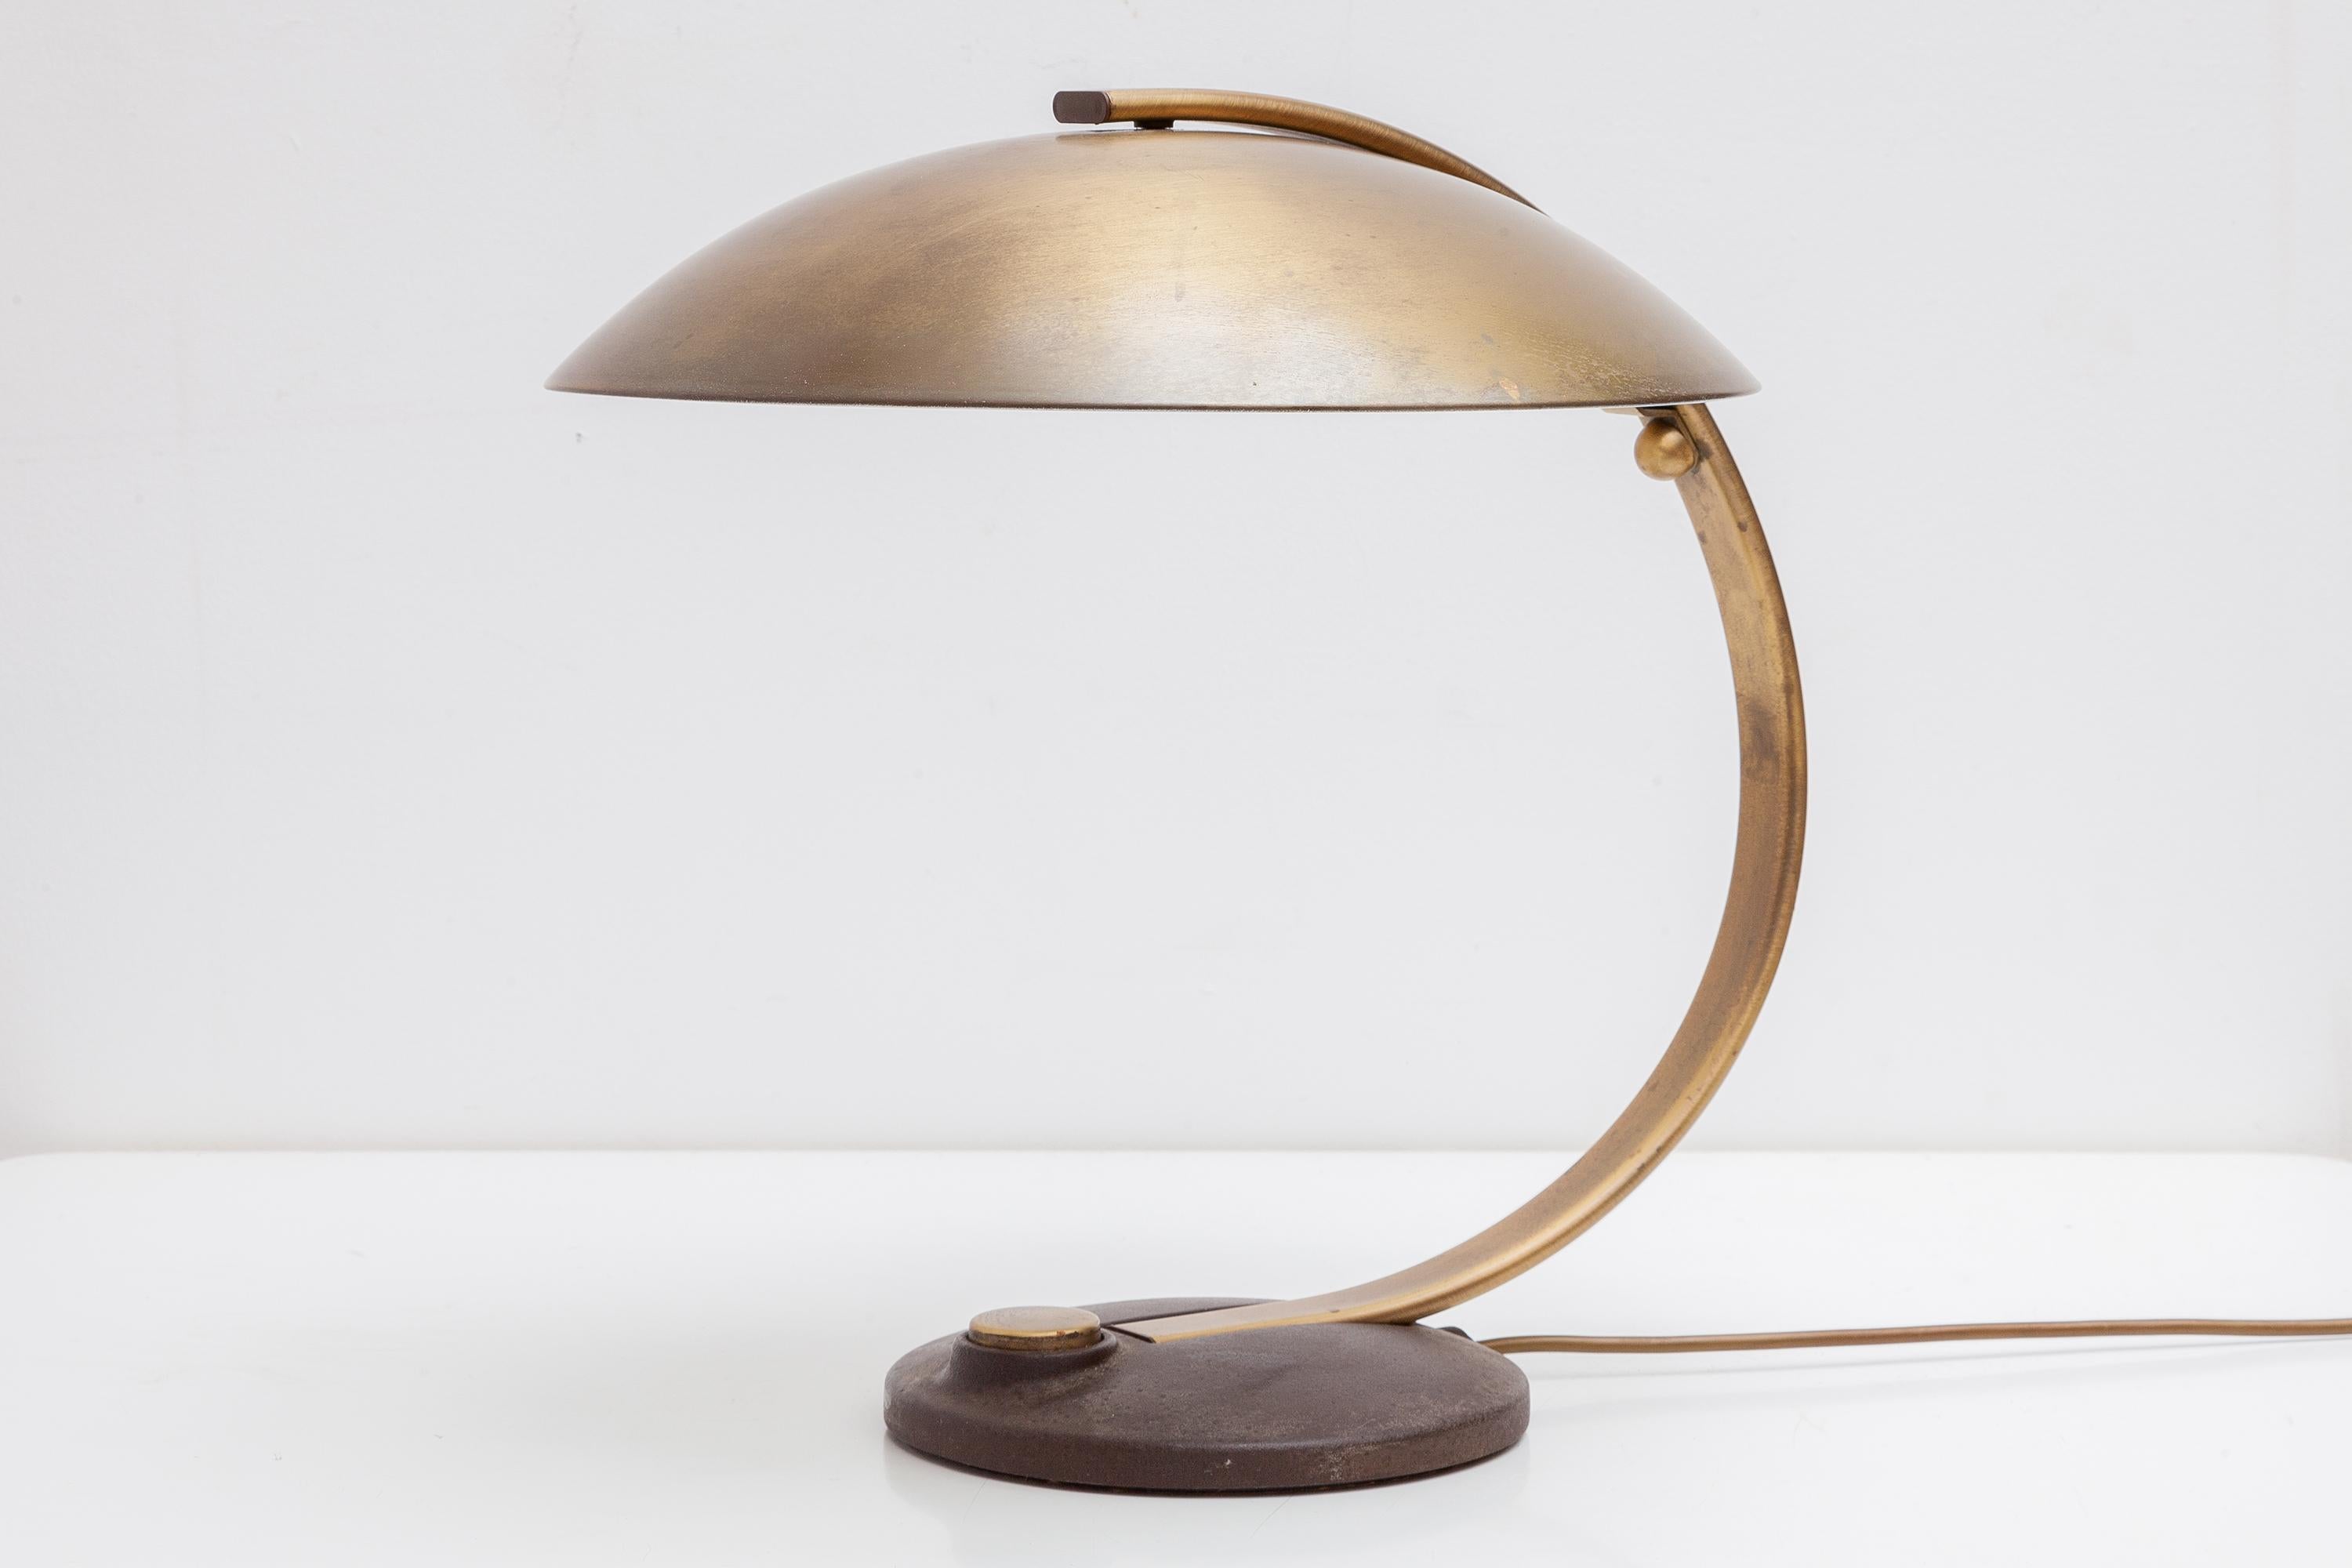 Beautiful large original Egon Hillebrand brass desk lamp, made in Germany, 1950s. Typical streamline design and heavy quality. Channel art deco vibes with this beautiful Hillebrand desk lamp in brass. Featuring an exaggerated curved arm and a round